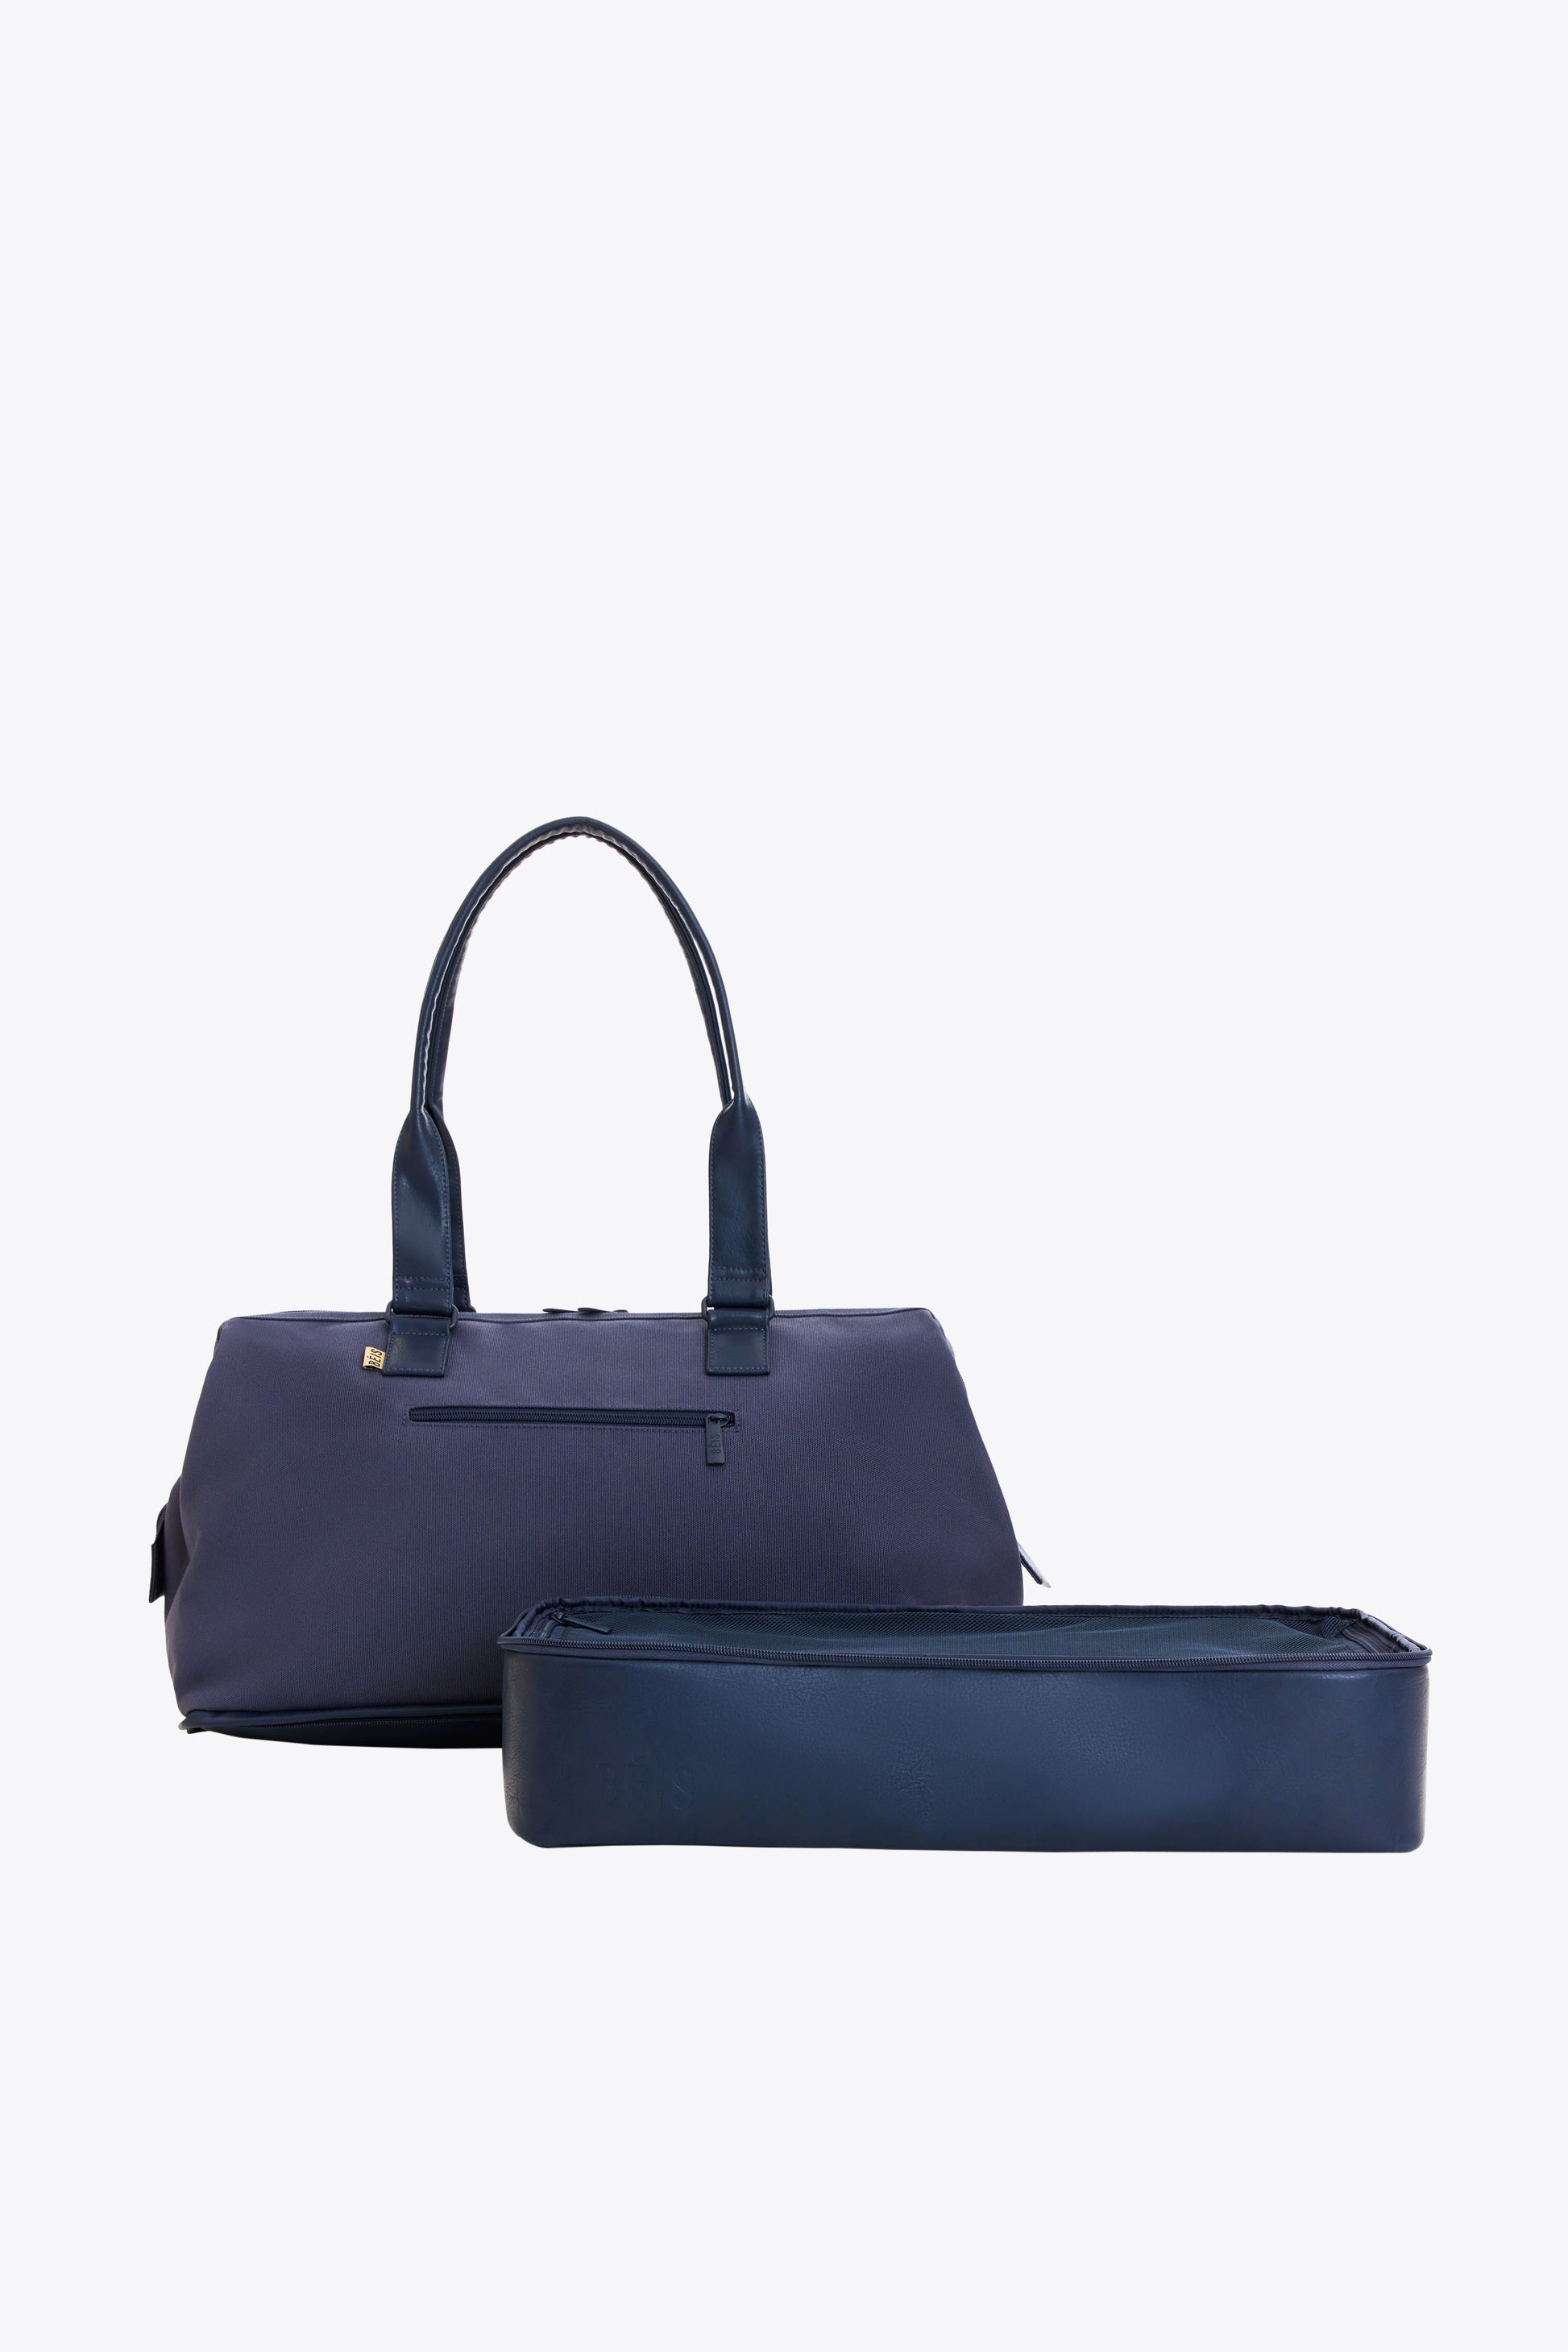 UPF 50+ Luxletic Weekender High Rise - Oyster Bay Navy On The Catwalk -  ShopperBoard